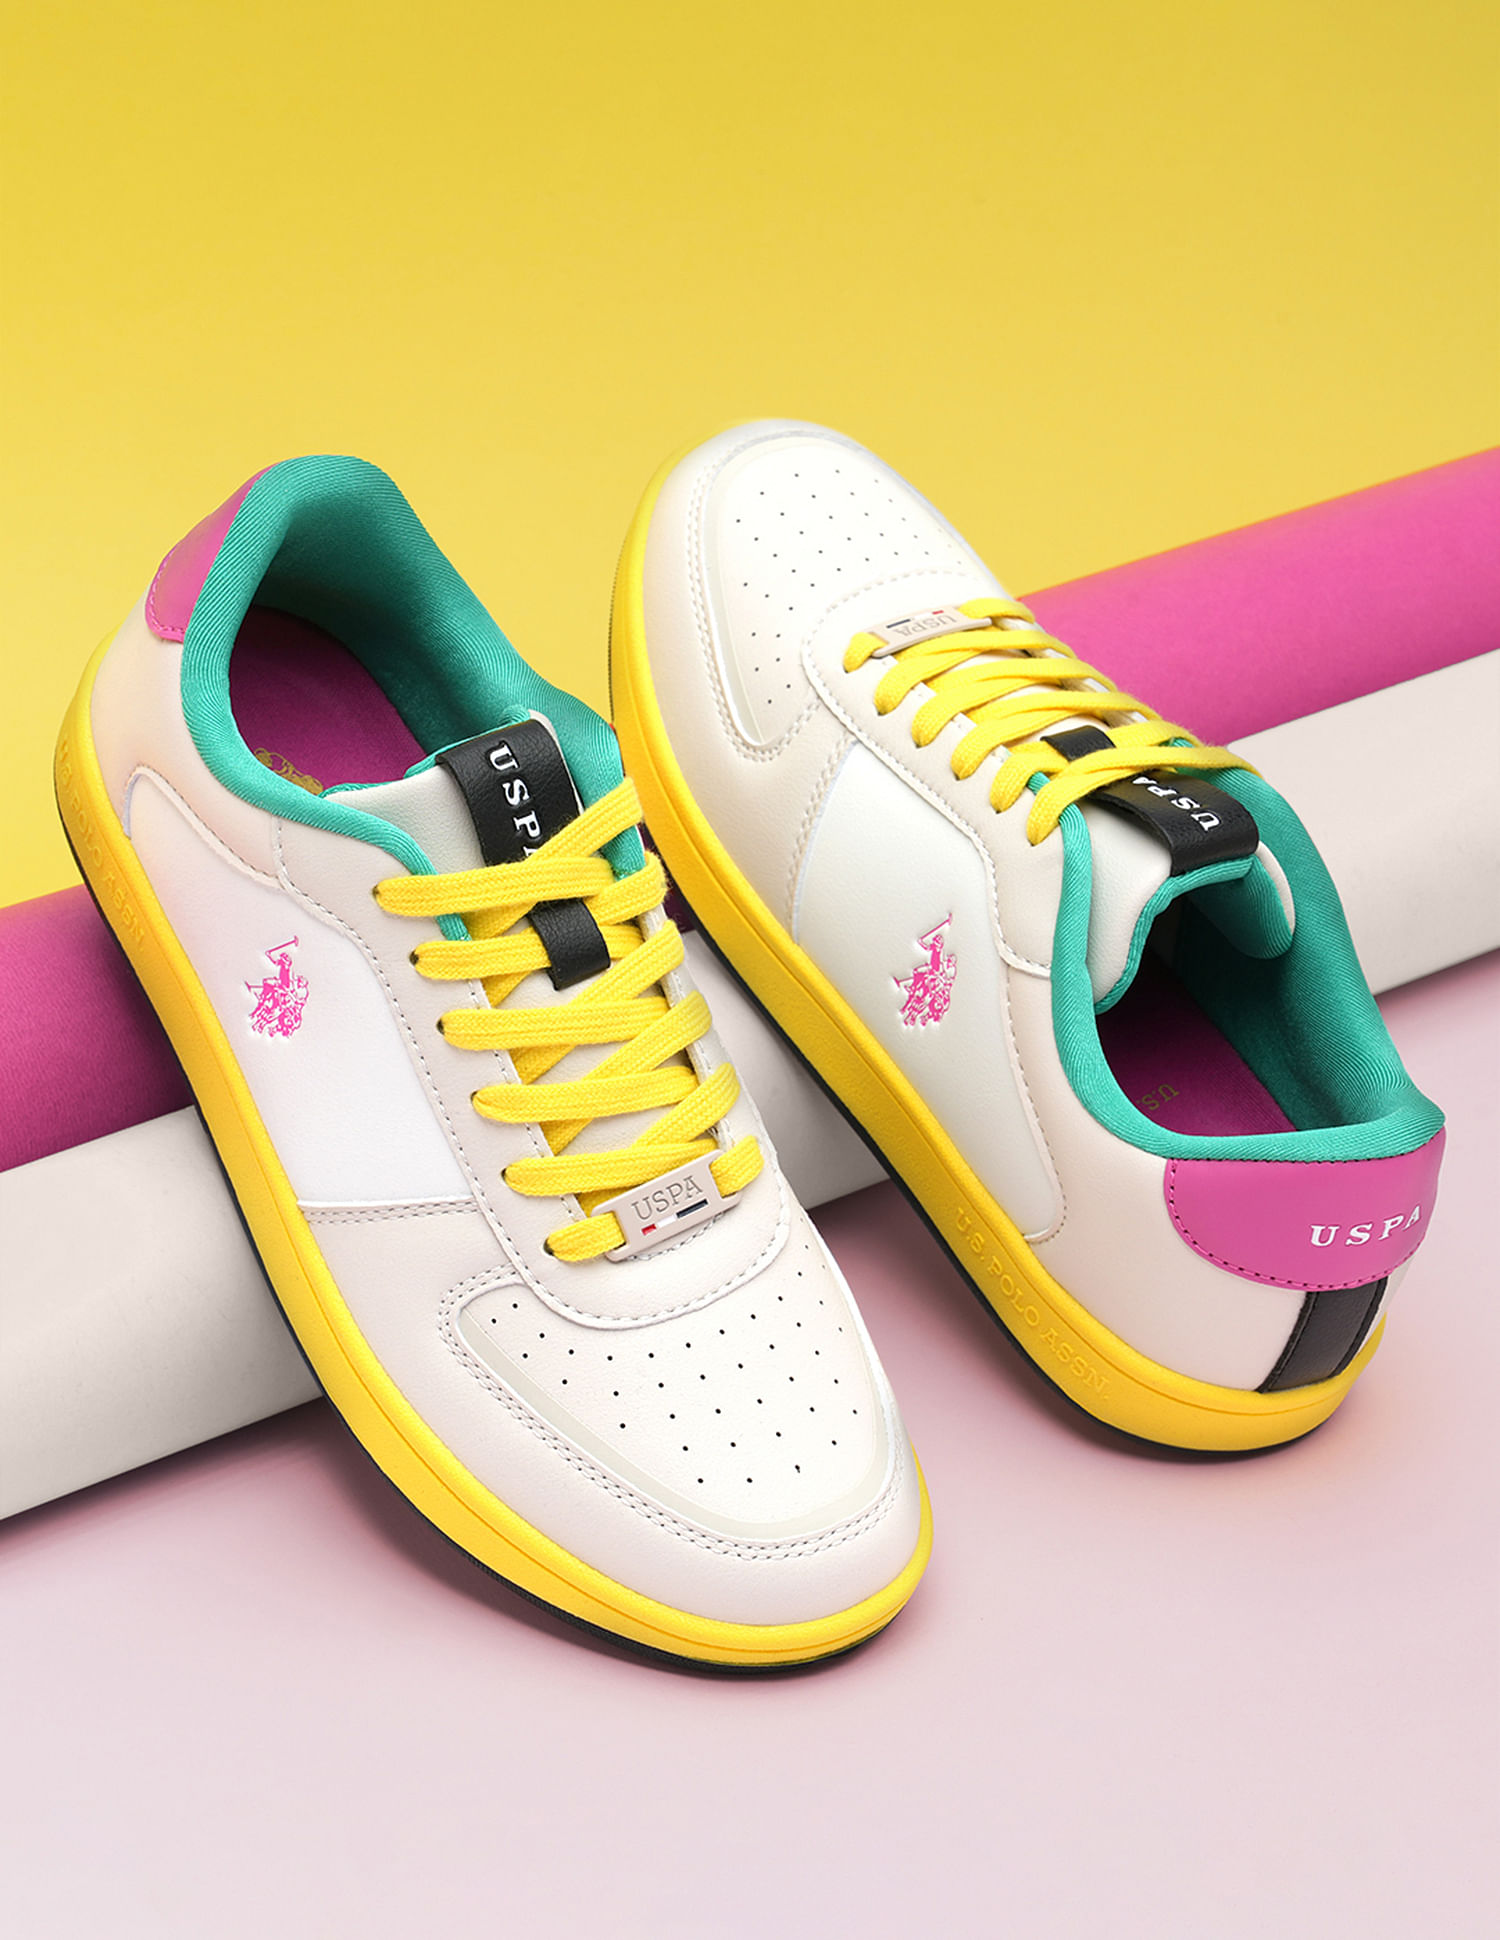 Color block sneakers with logo - TWINSET - Chenzo-as247.edu.vn